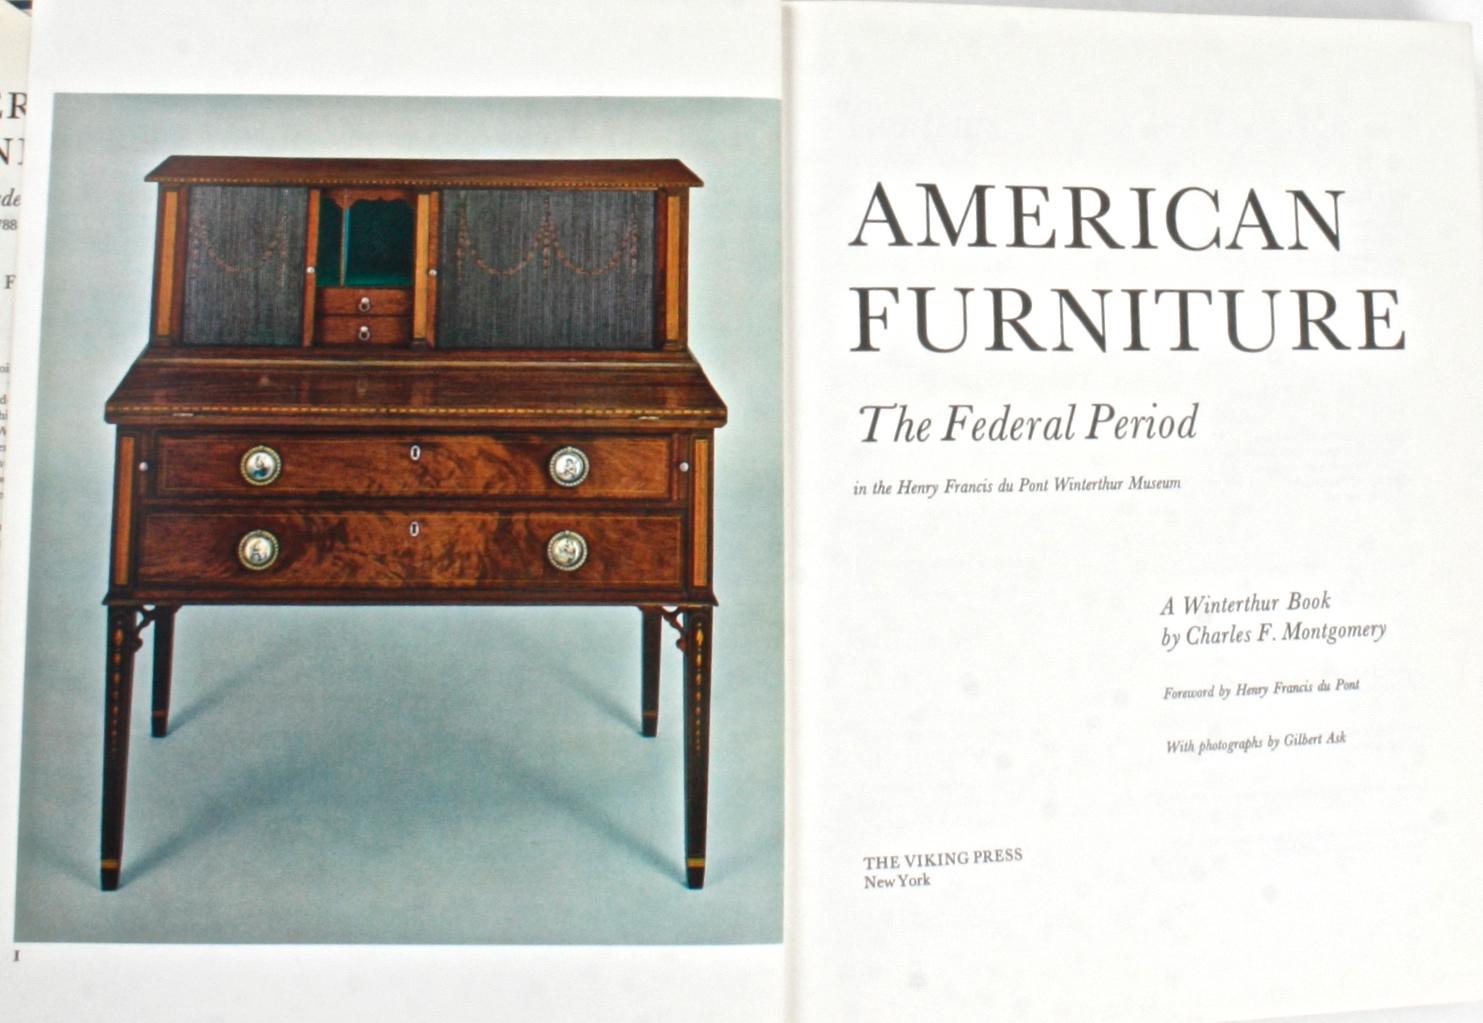 American Furniture, The Federal Period by Charles F. Montgomery. New York: The Viking Press, 1966. Hardcover with dust jacket. 496 pp. A large reference book on American federal period furniture (1788-1825) in the Henry Francis du Pont Winterthur